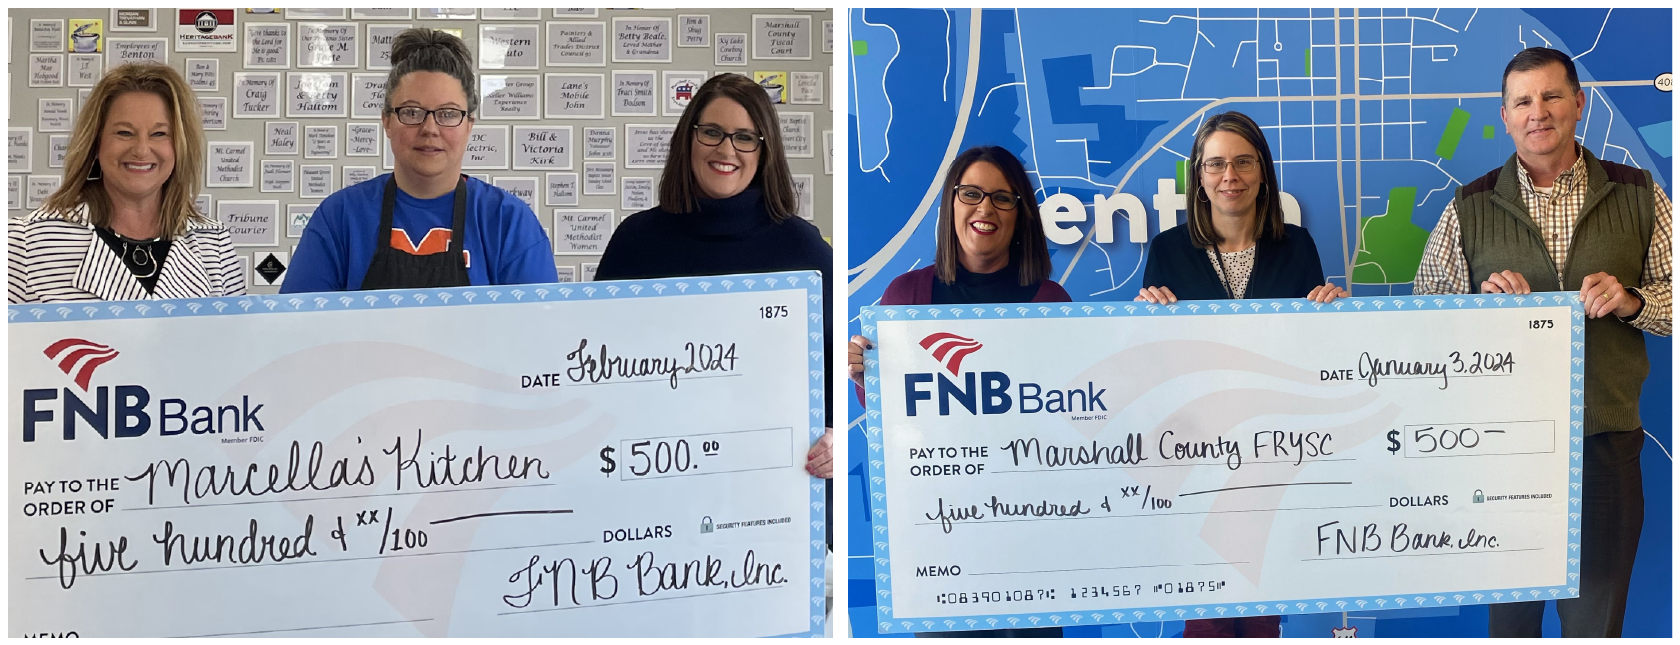 FNB MAKES $1,000 CHRISTMAS DONATION TO TWO CHARITIES IN BENTON - MARSHALL COUNTY